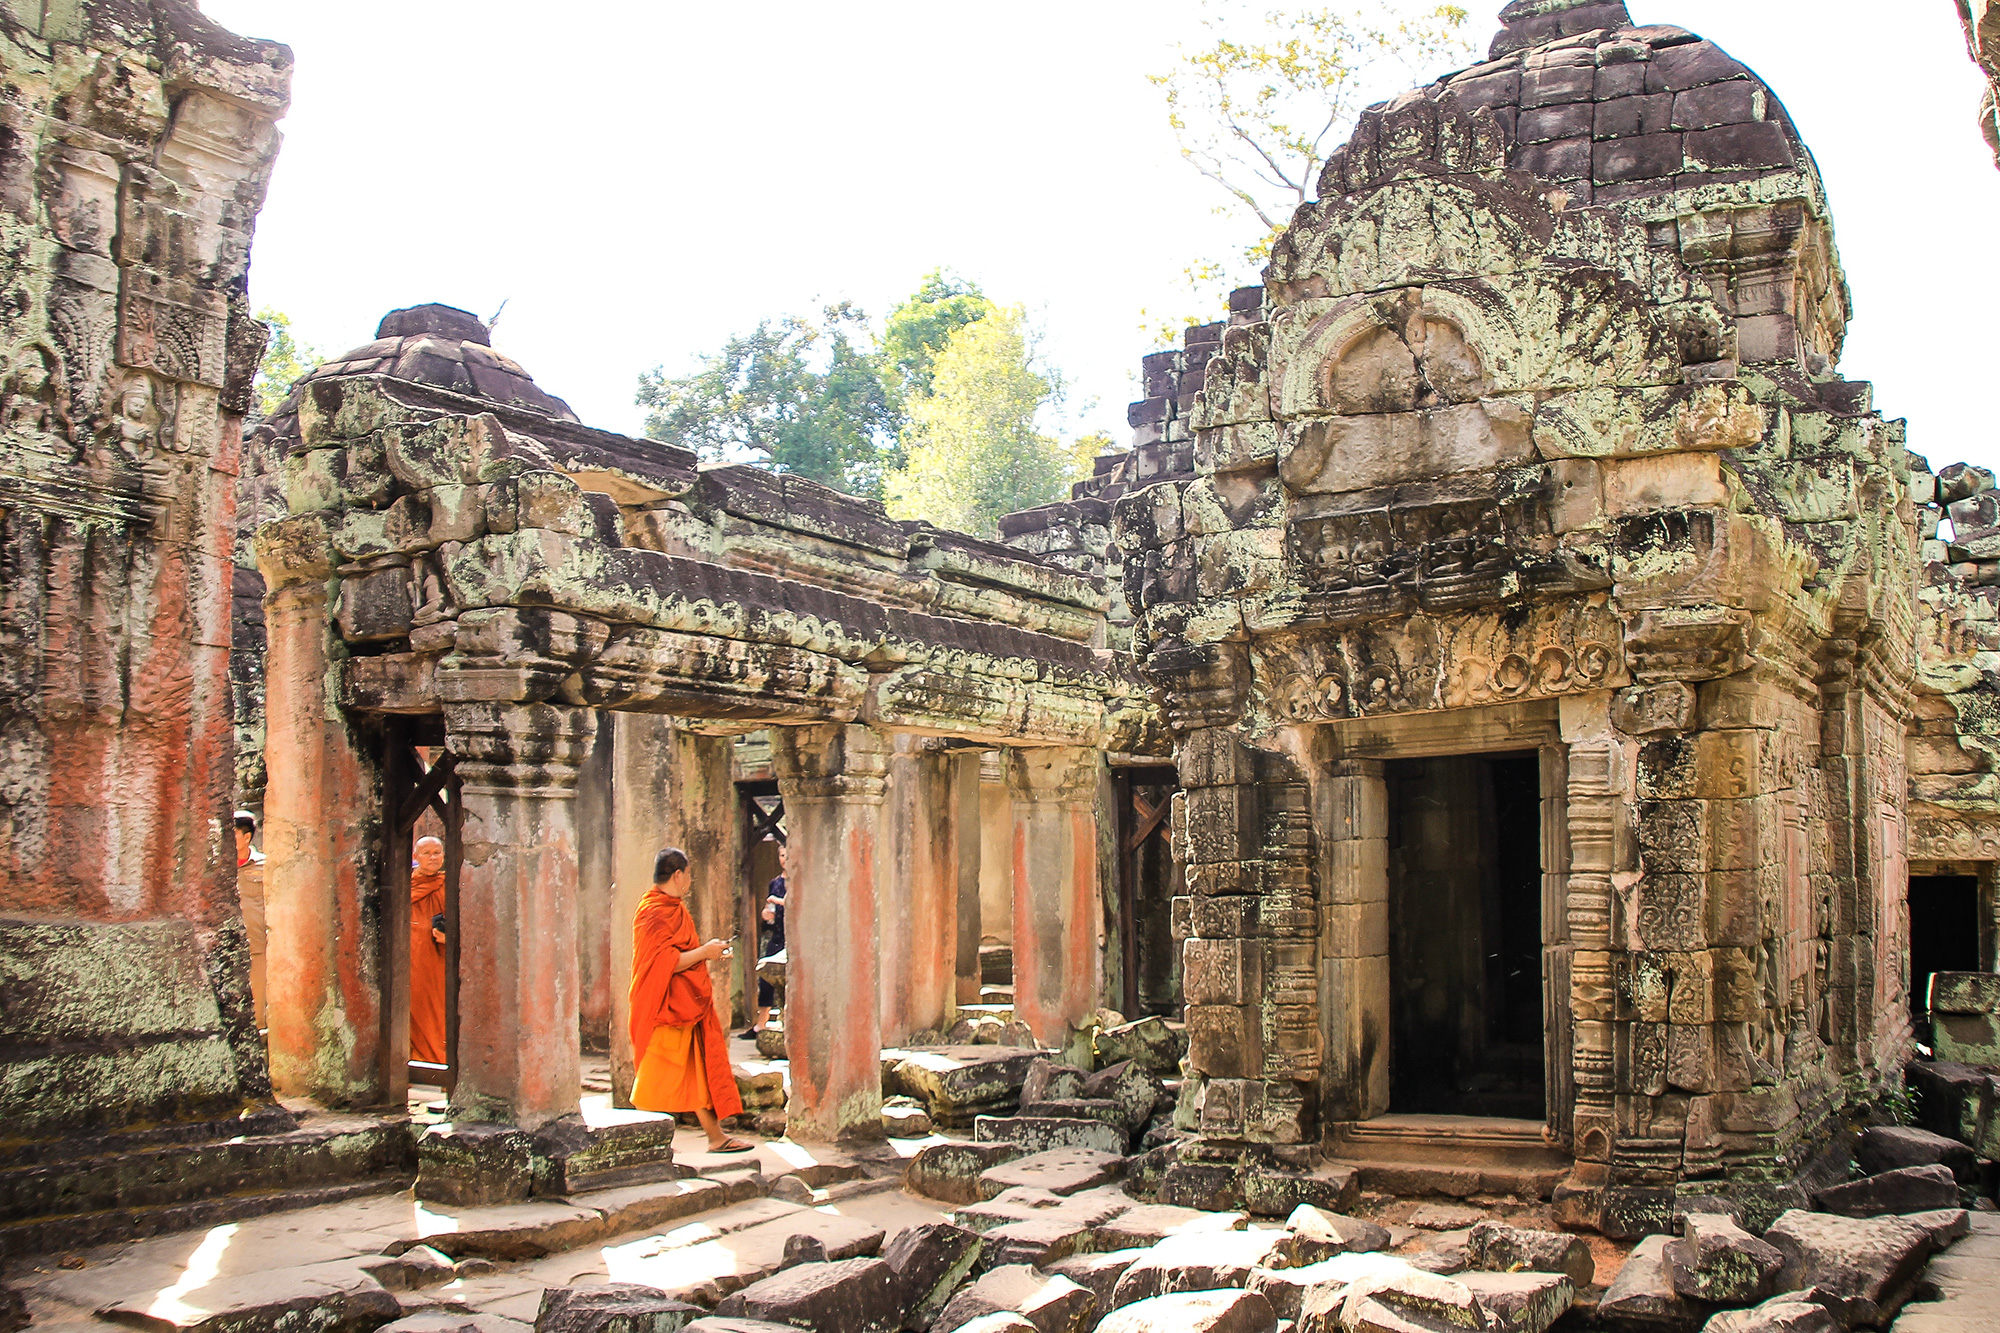 Angkor Wat in Cambodia is one of the highlights on a Mekong River cruise